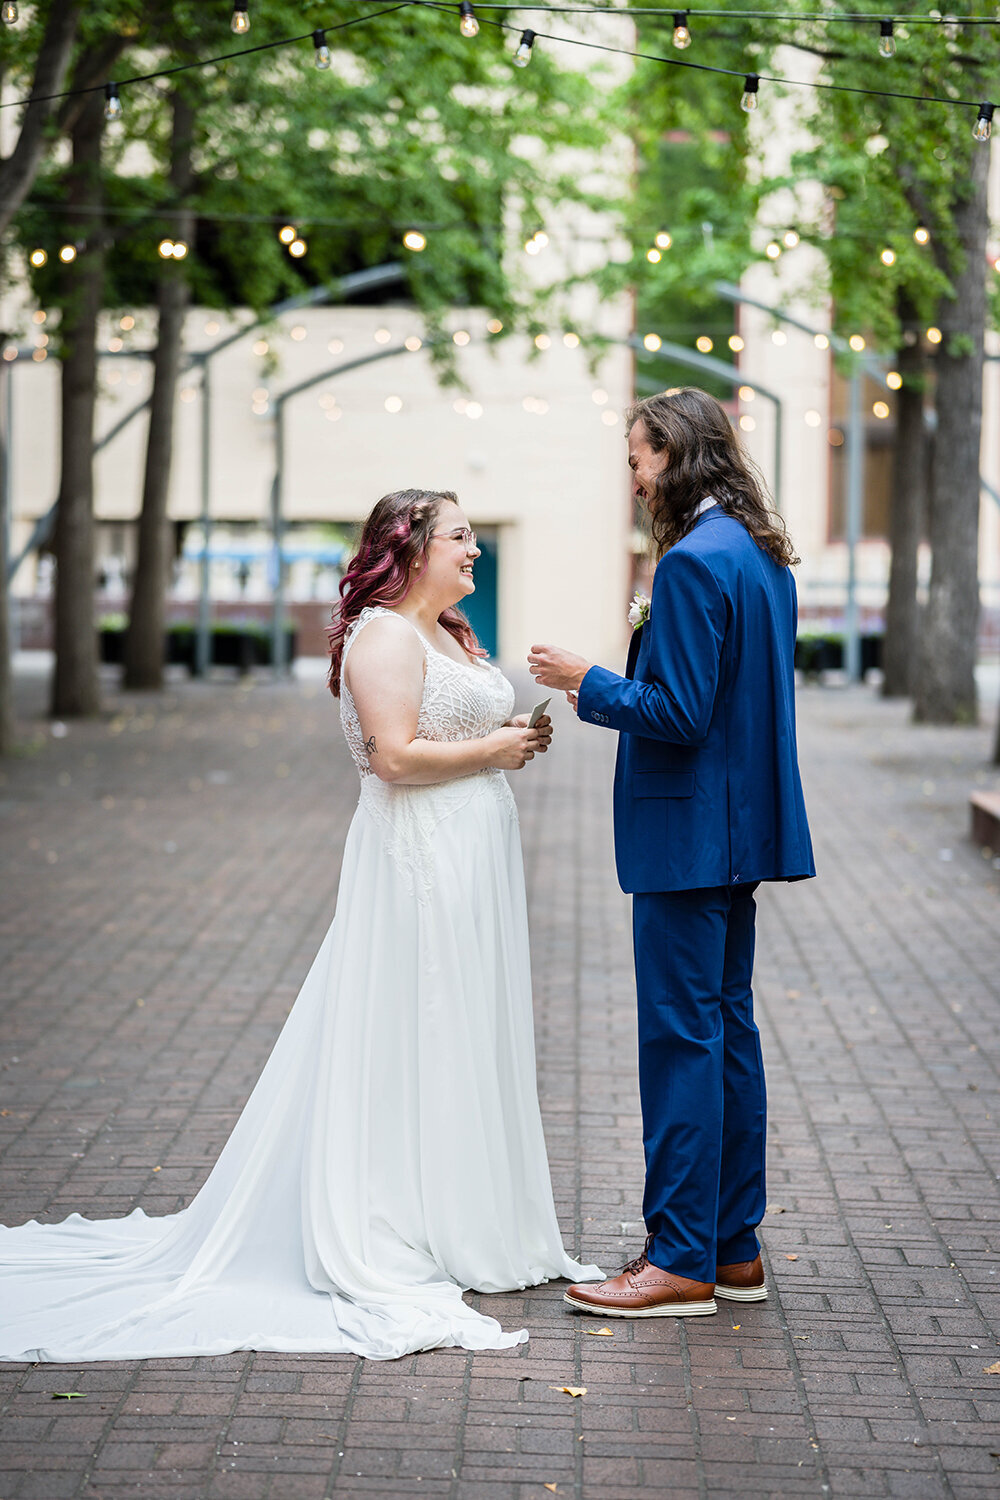 A wedding couple smiles widely at one another as they prepare to read their vows on their elopement day in a secluded, private, tea-lit alleyway in Roanoke, Virginia.